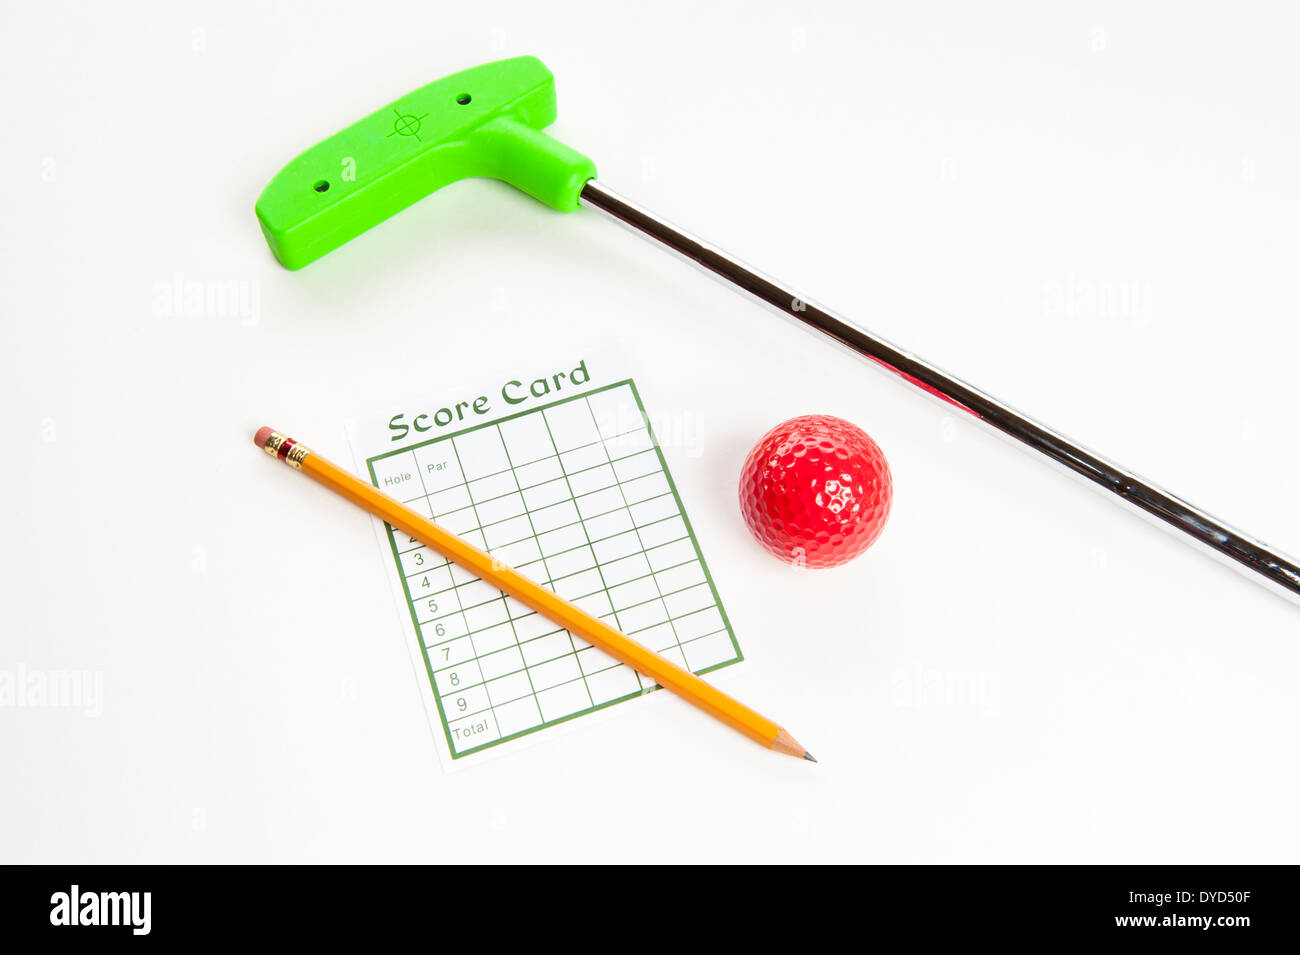 Green mini golf club with score card, pencil and red ball Stock Photo